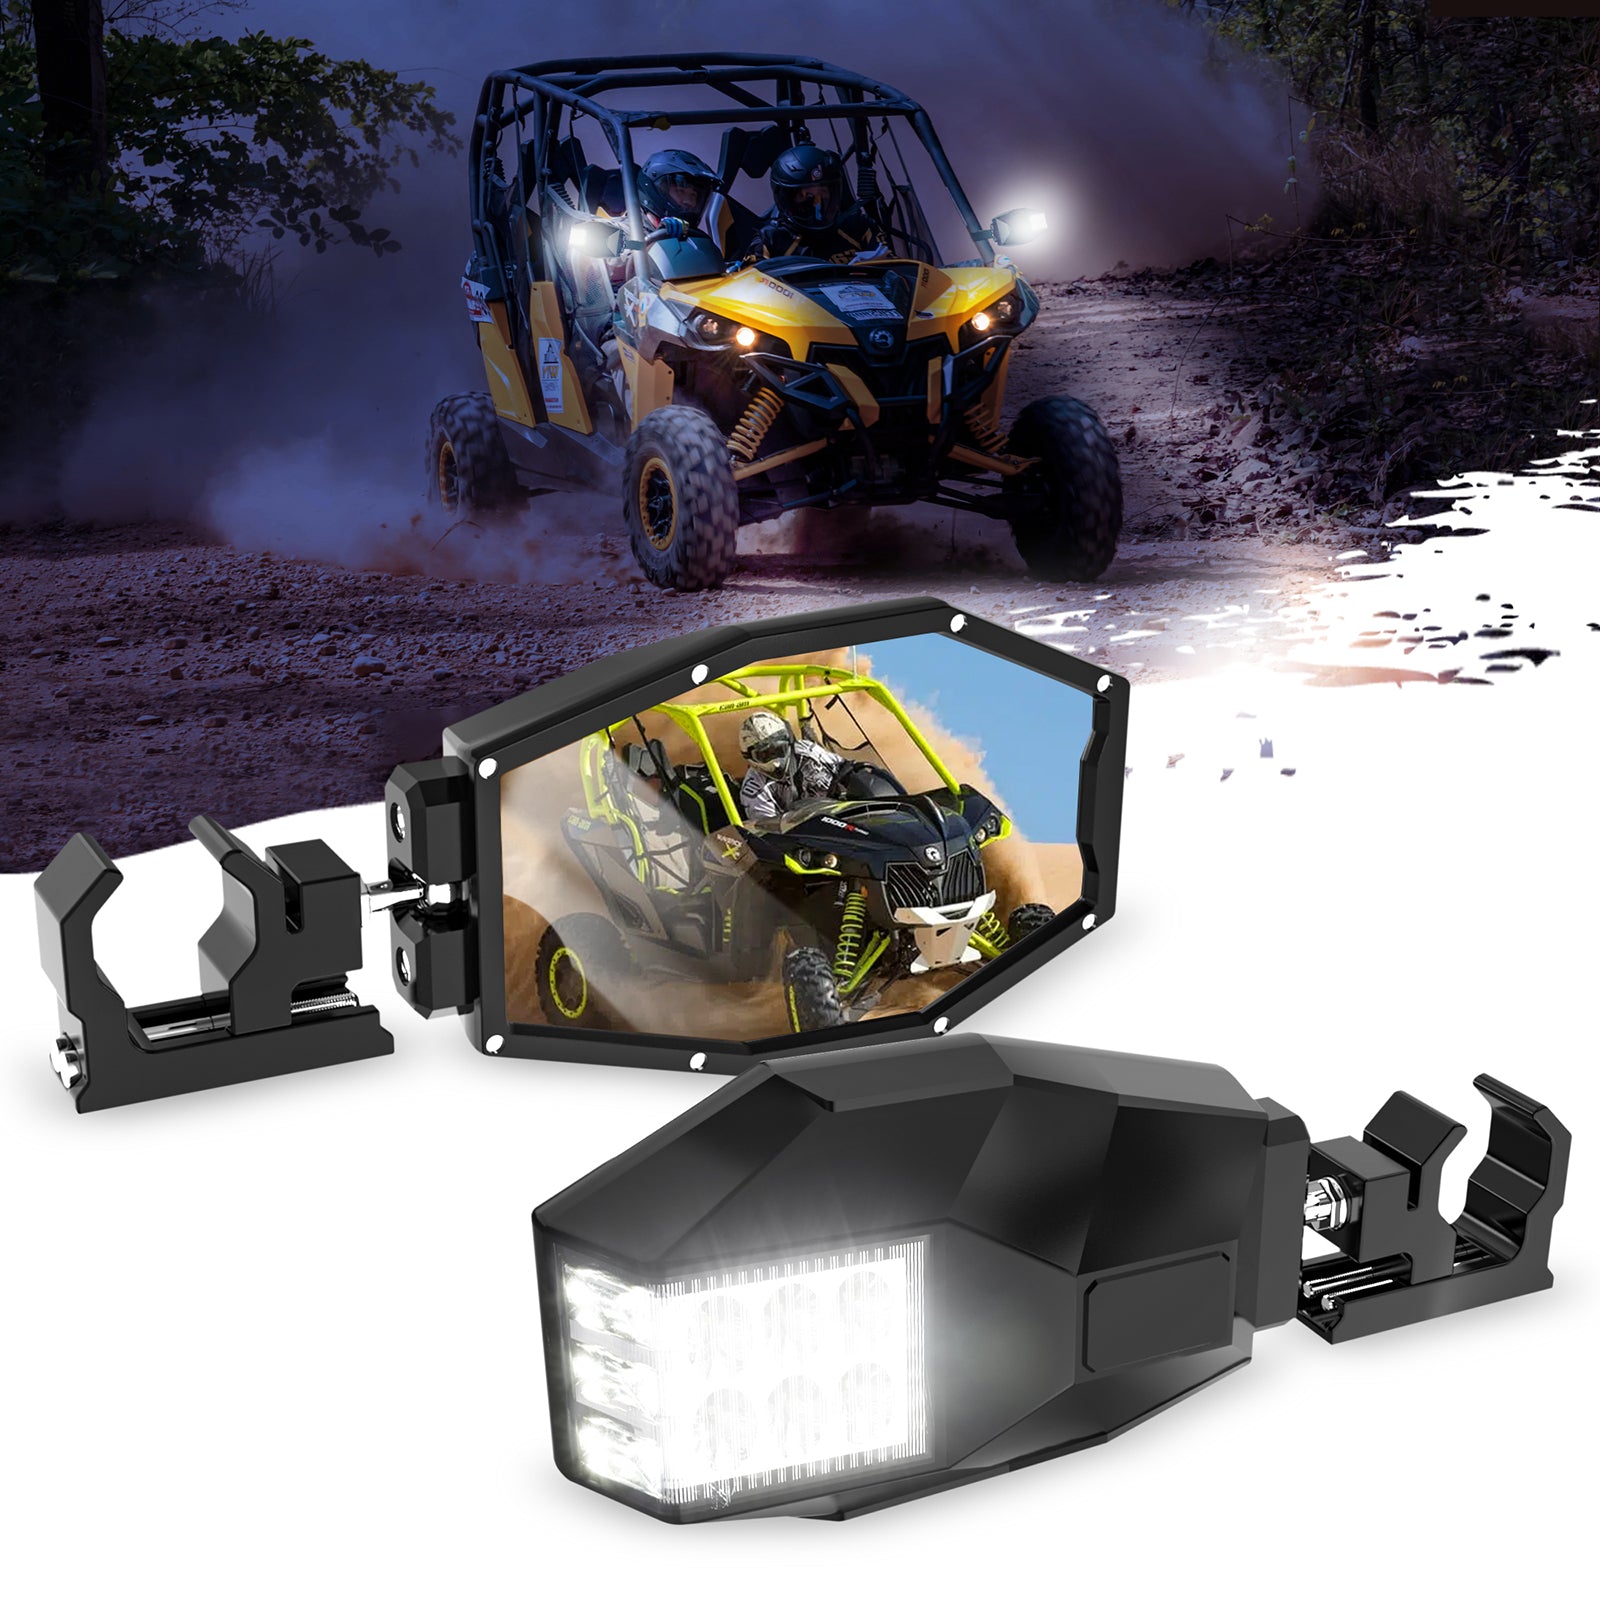 UTV RZR Side Rear View Mirrors w/ LED Lights 45W, Fits All 1-2 Roll Bar  Cage